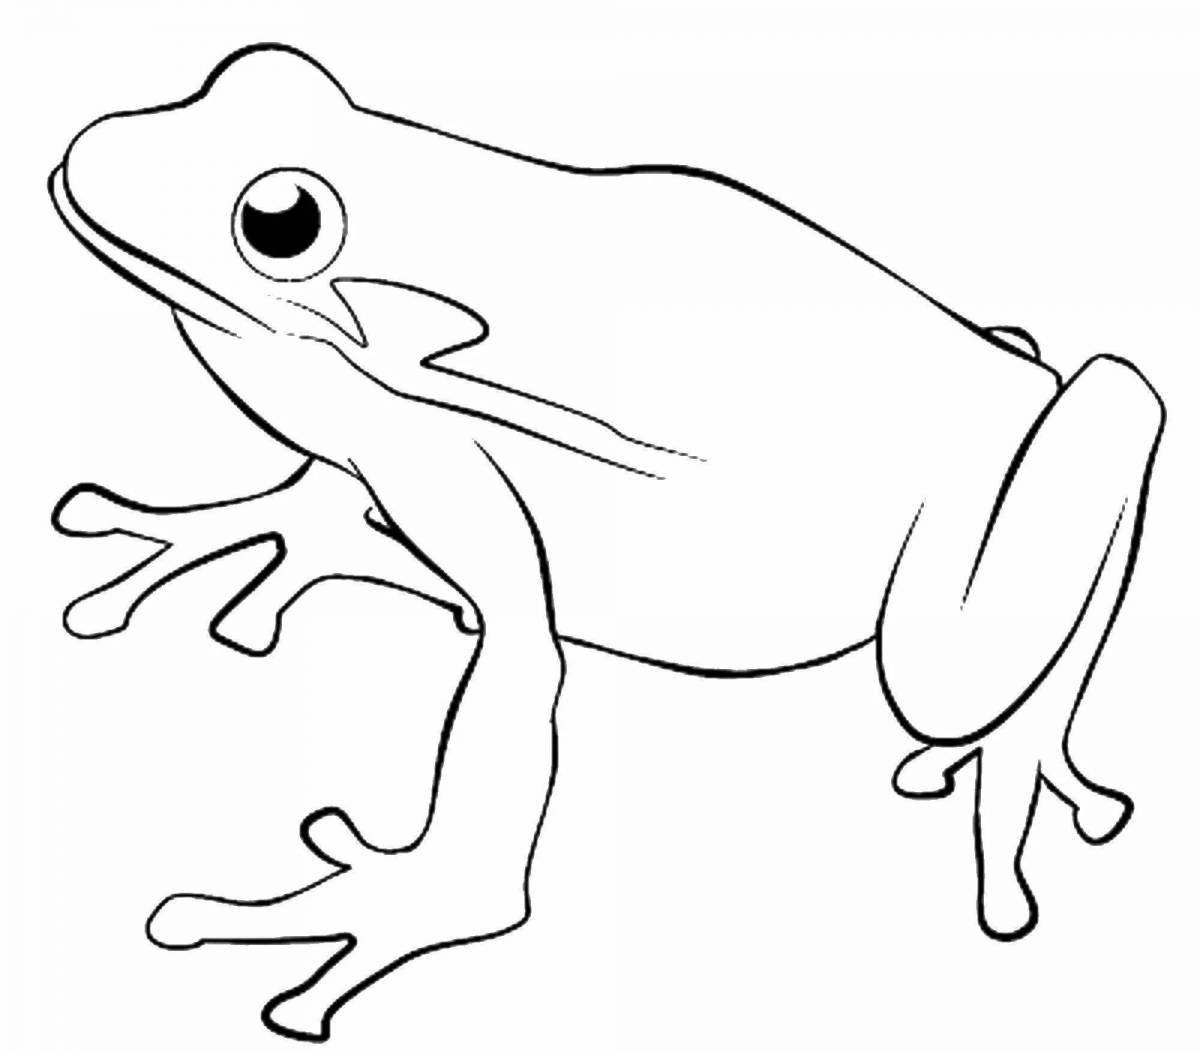 Amazing frog drawing for kids